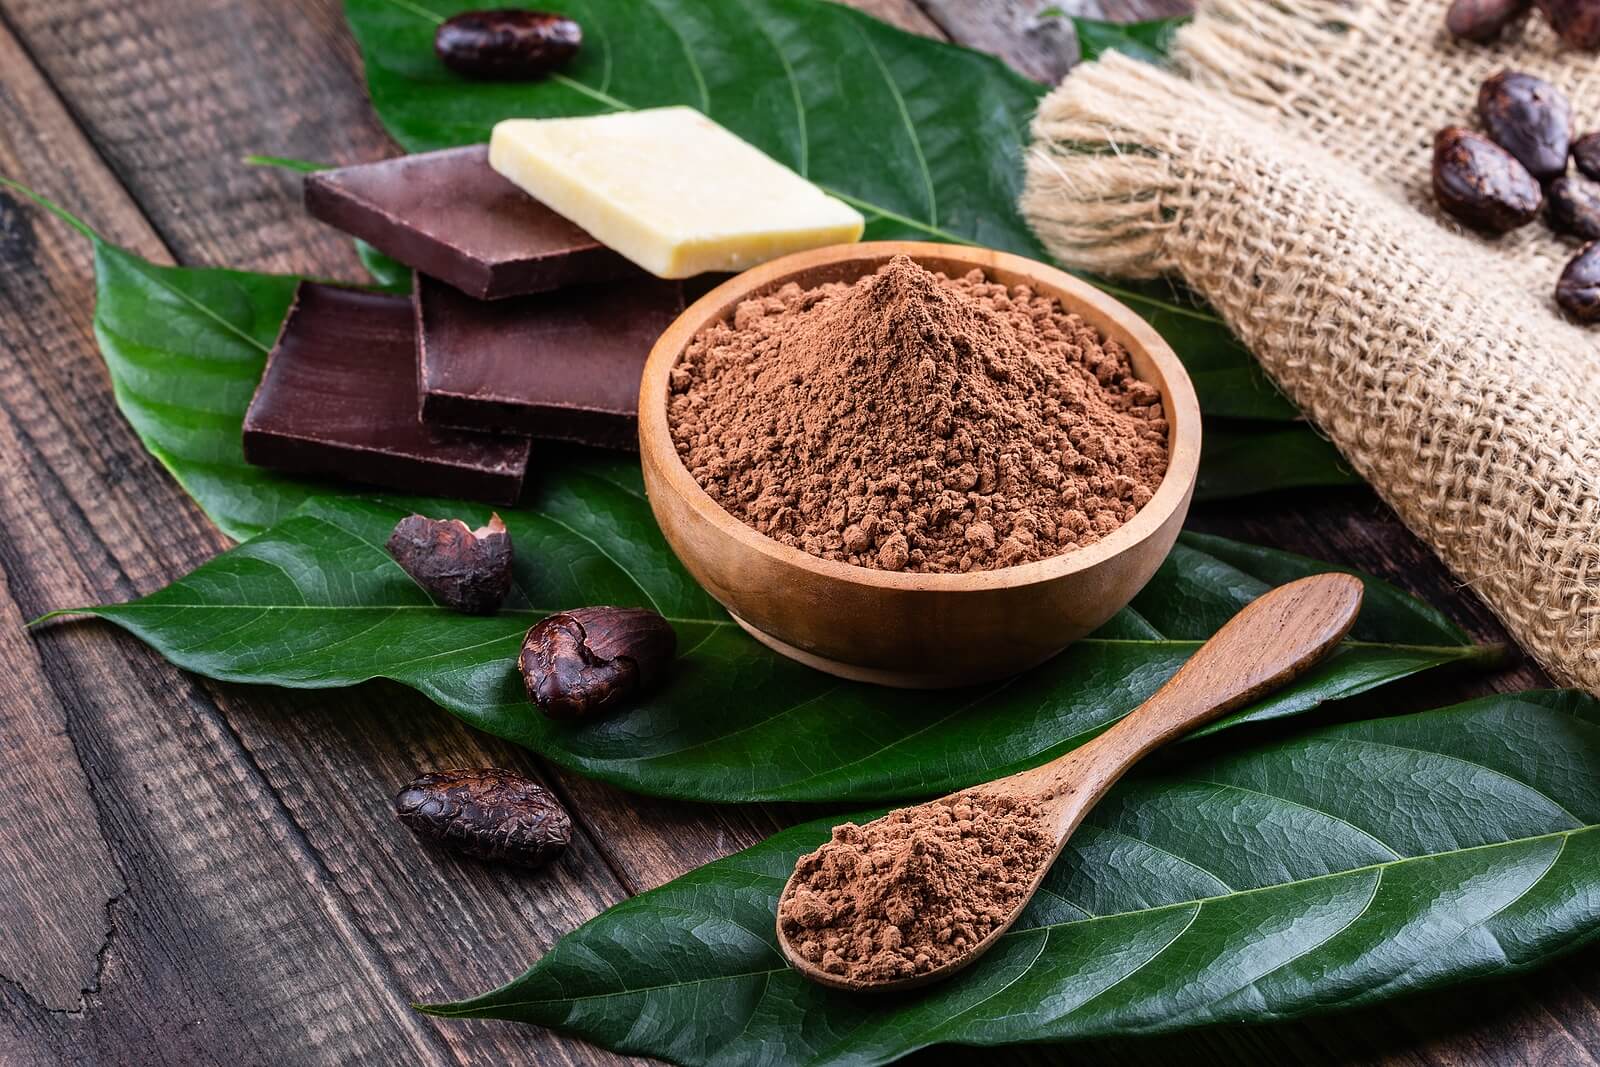 Cocoa in its various forms.